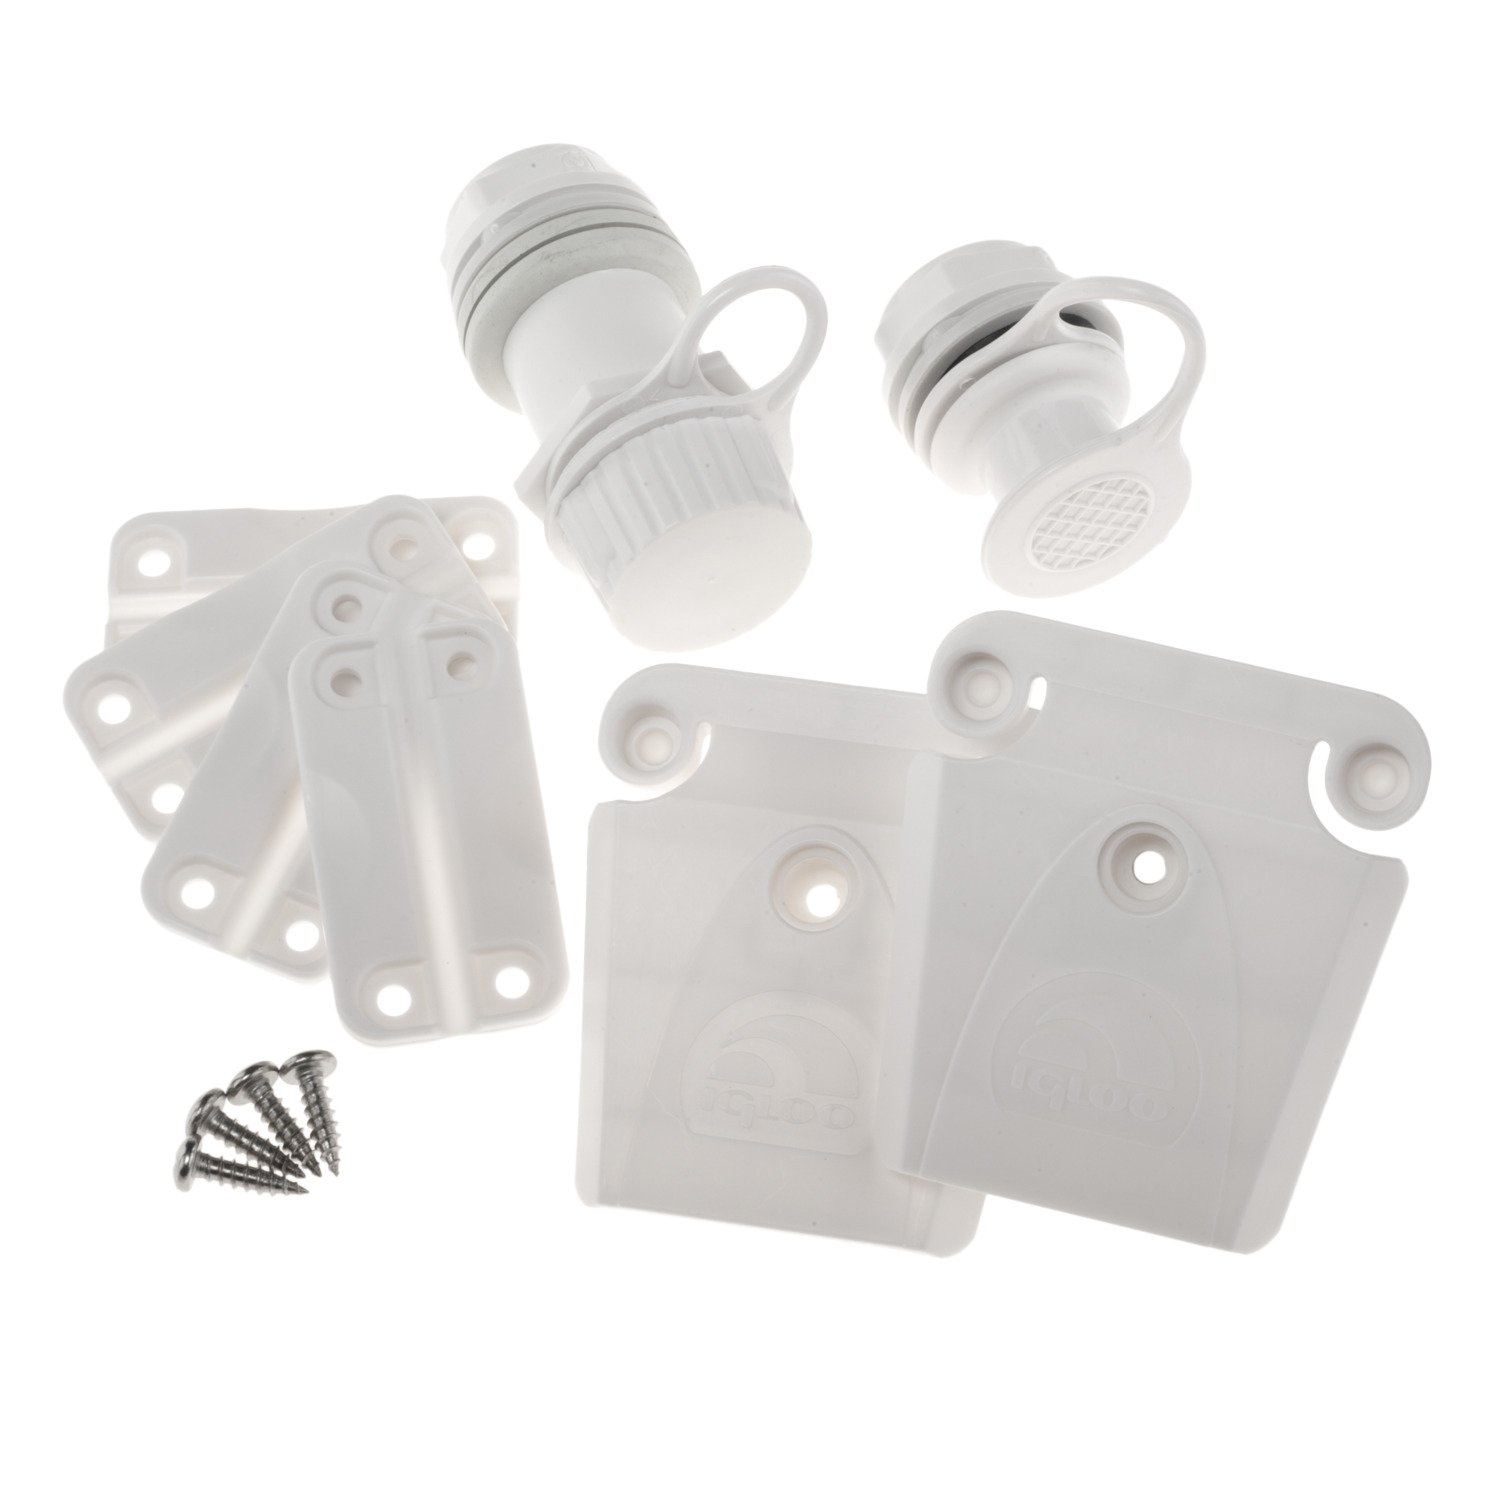 NEW Igloo Parts Kit for Ice Chests FREE SHIPPING 